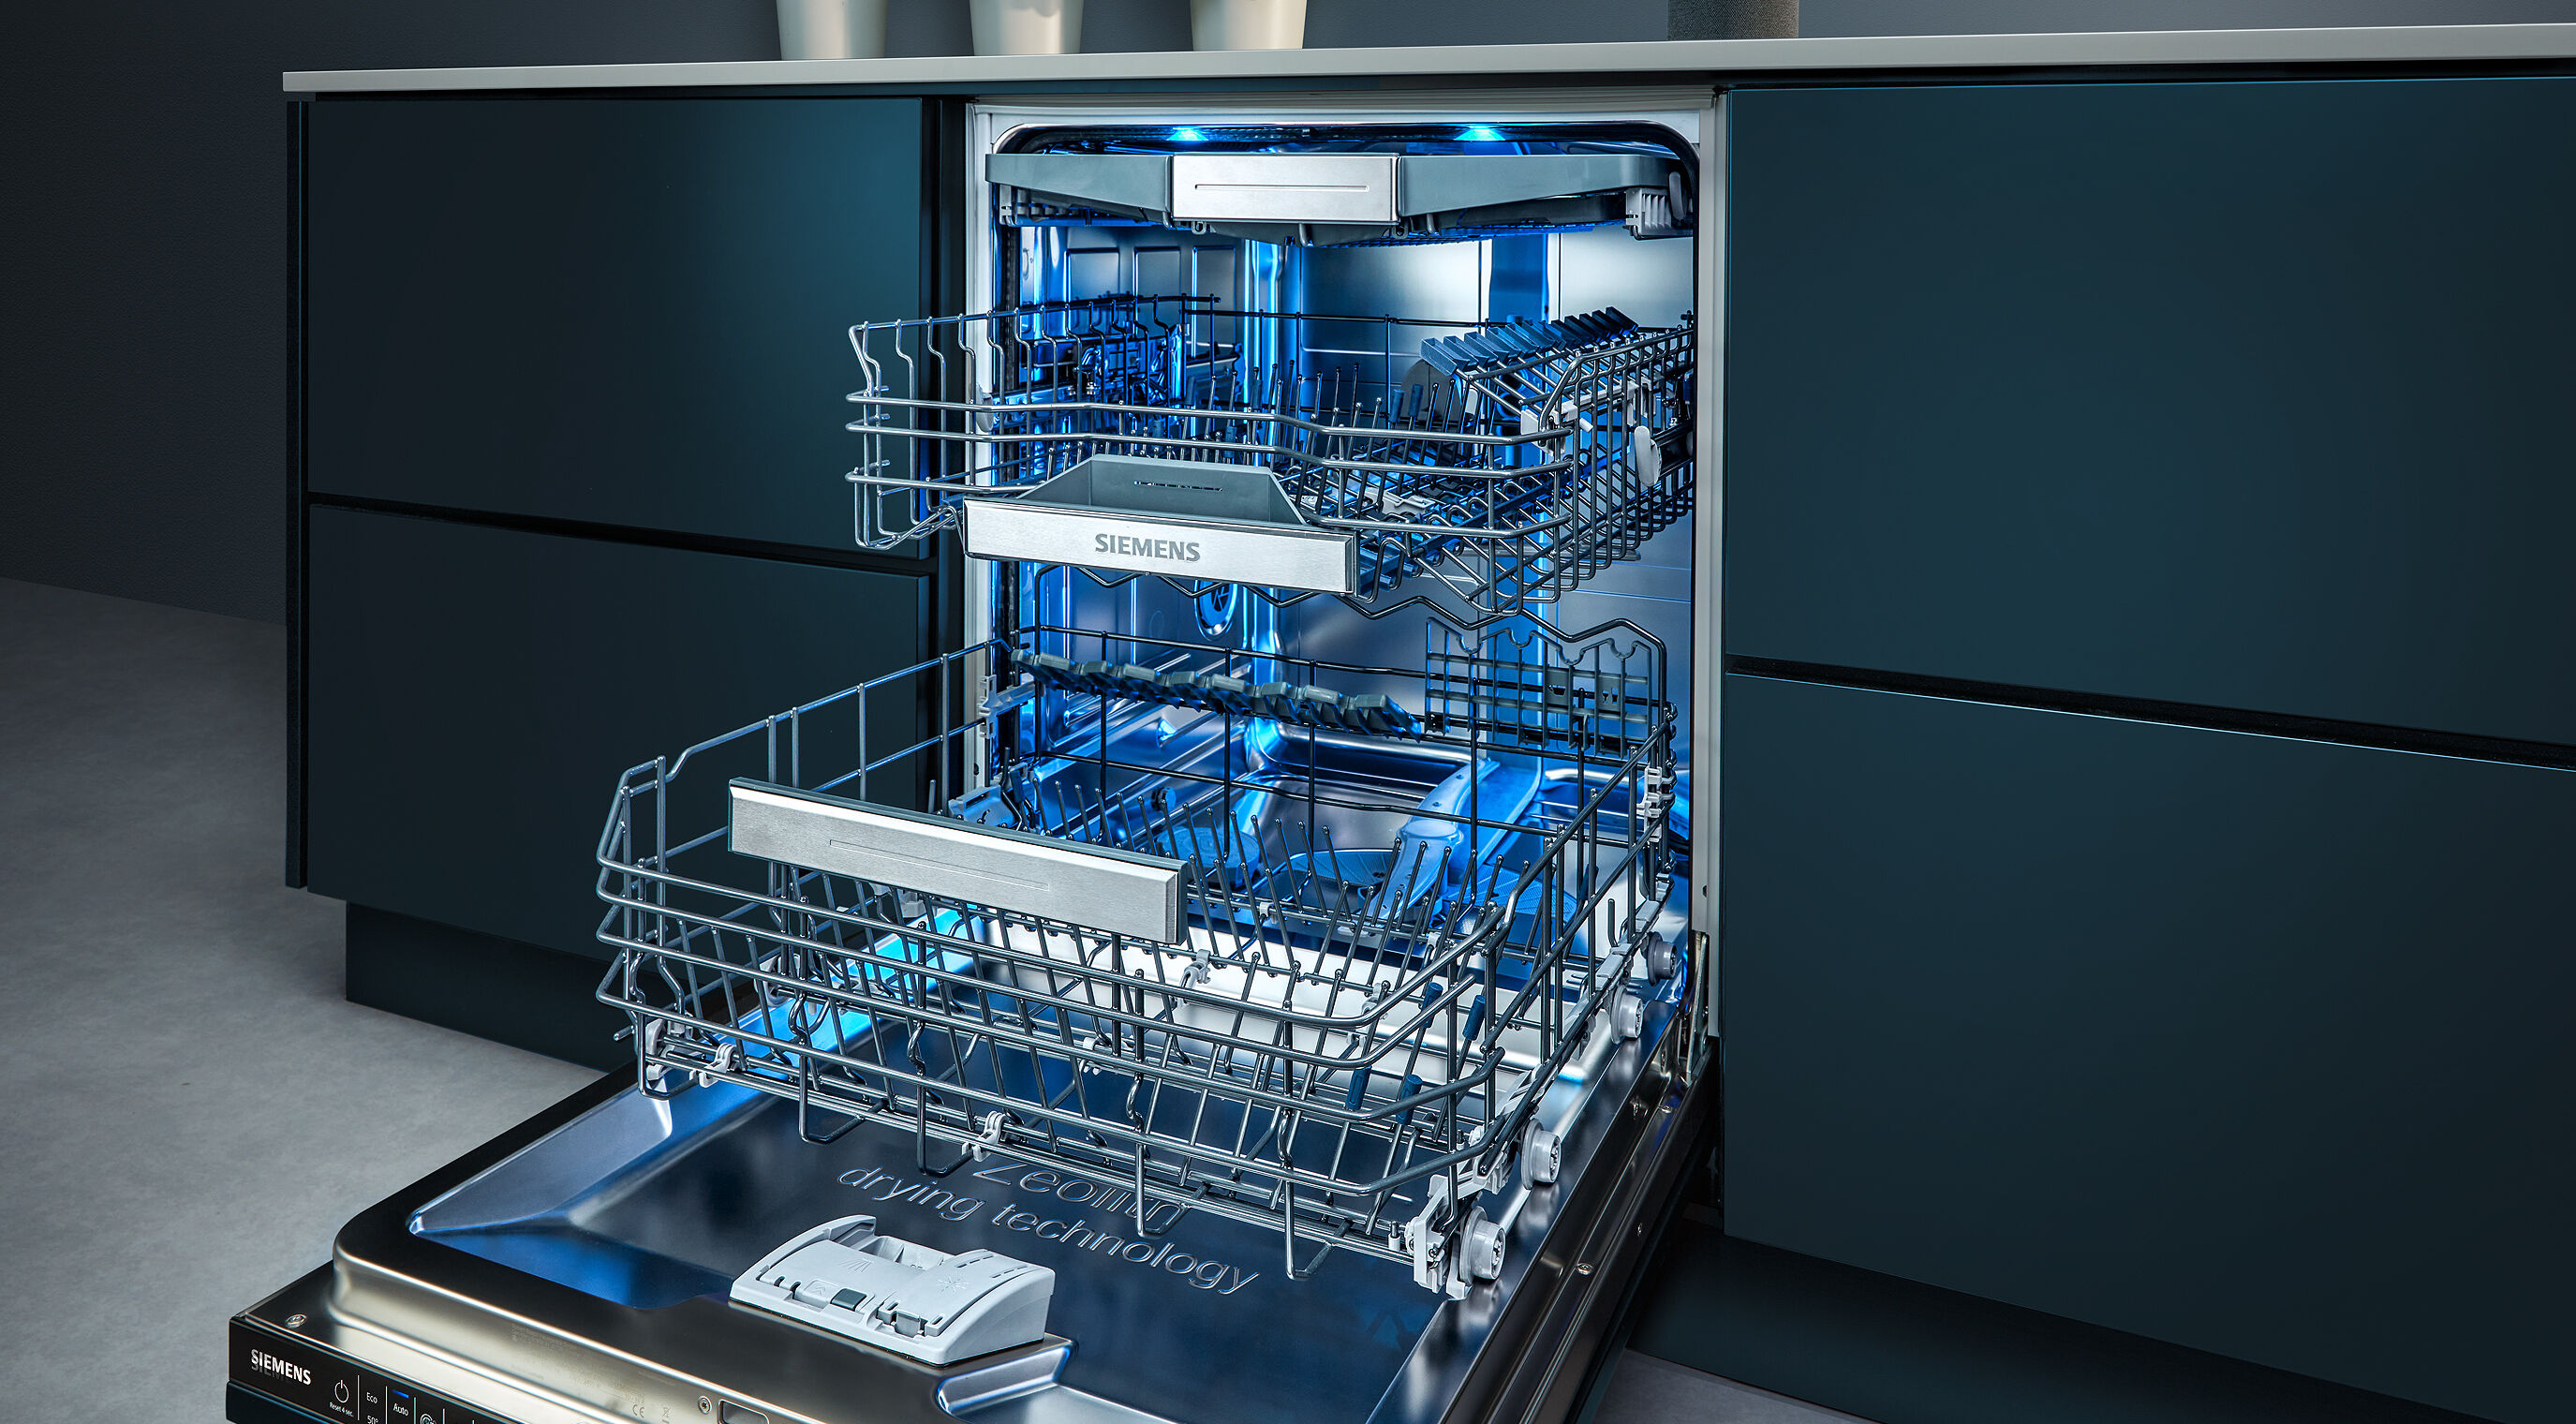 Smart Technology in Dishwashers: A Look at Siemens Models